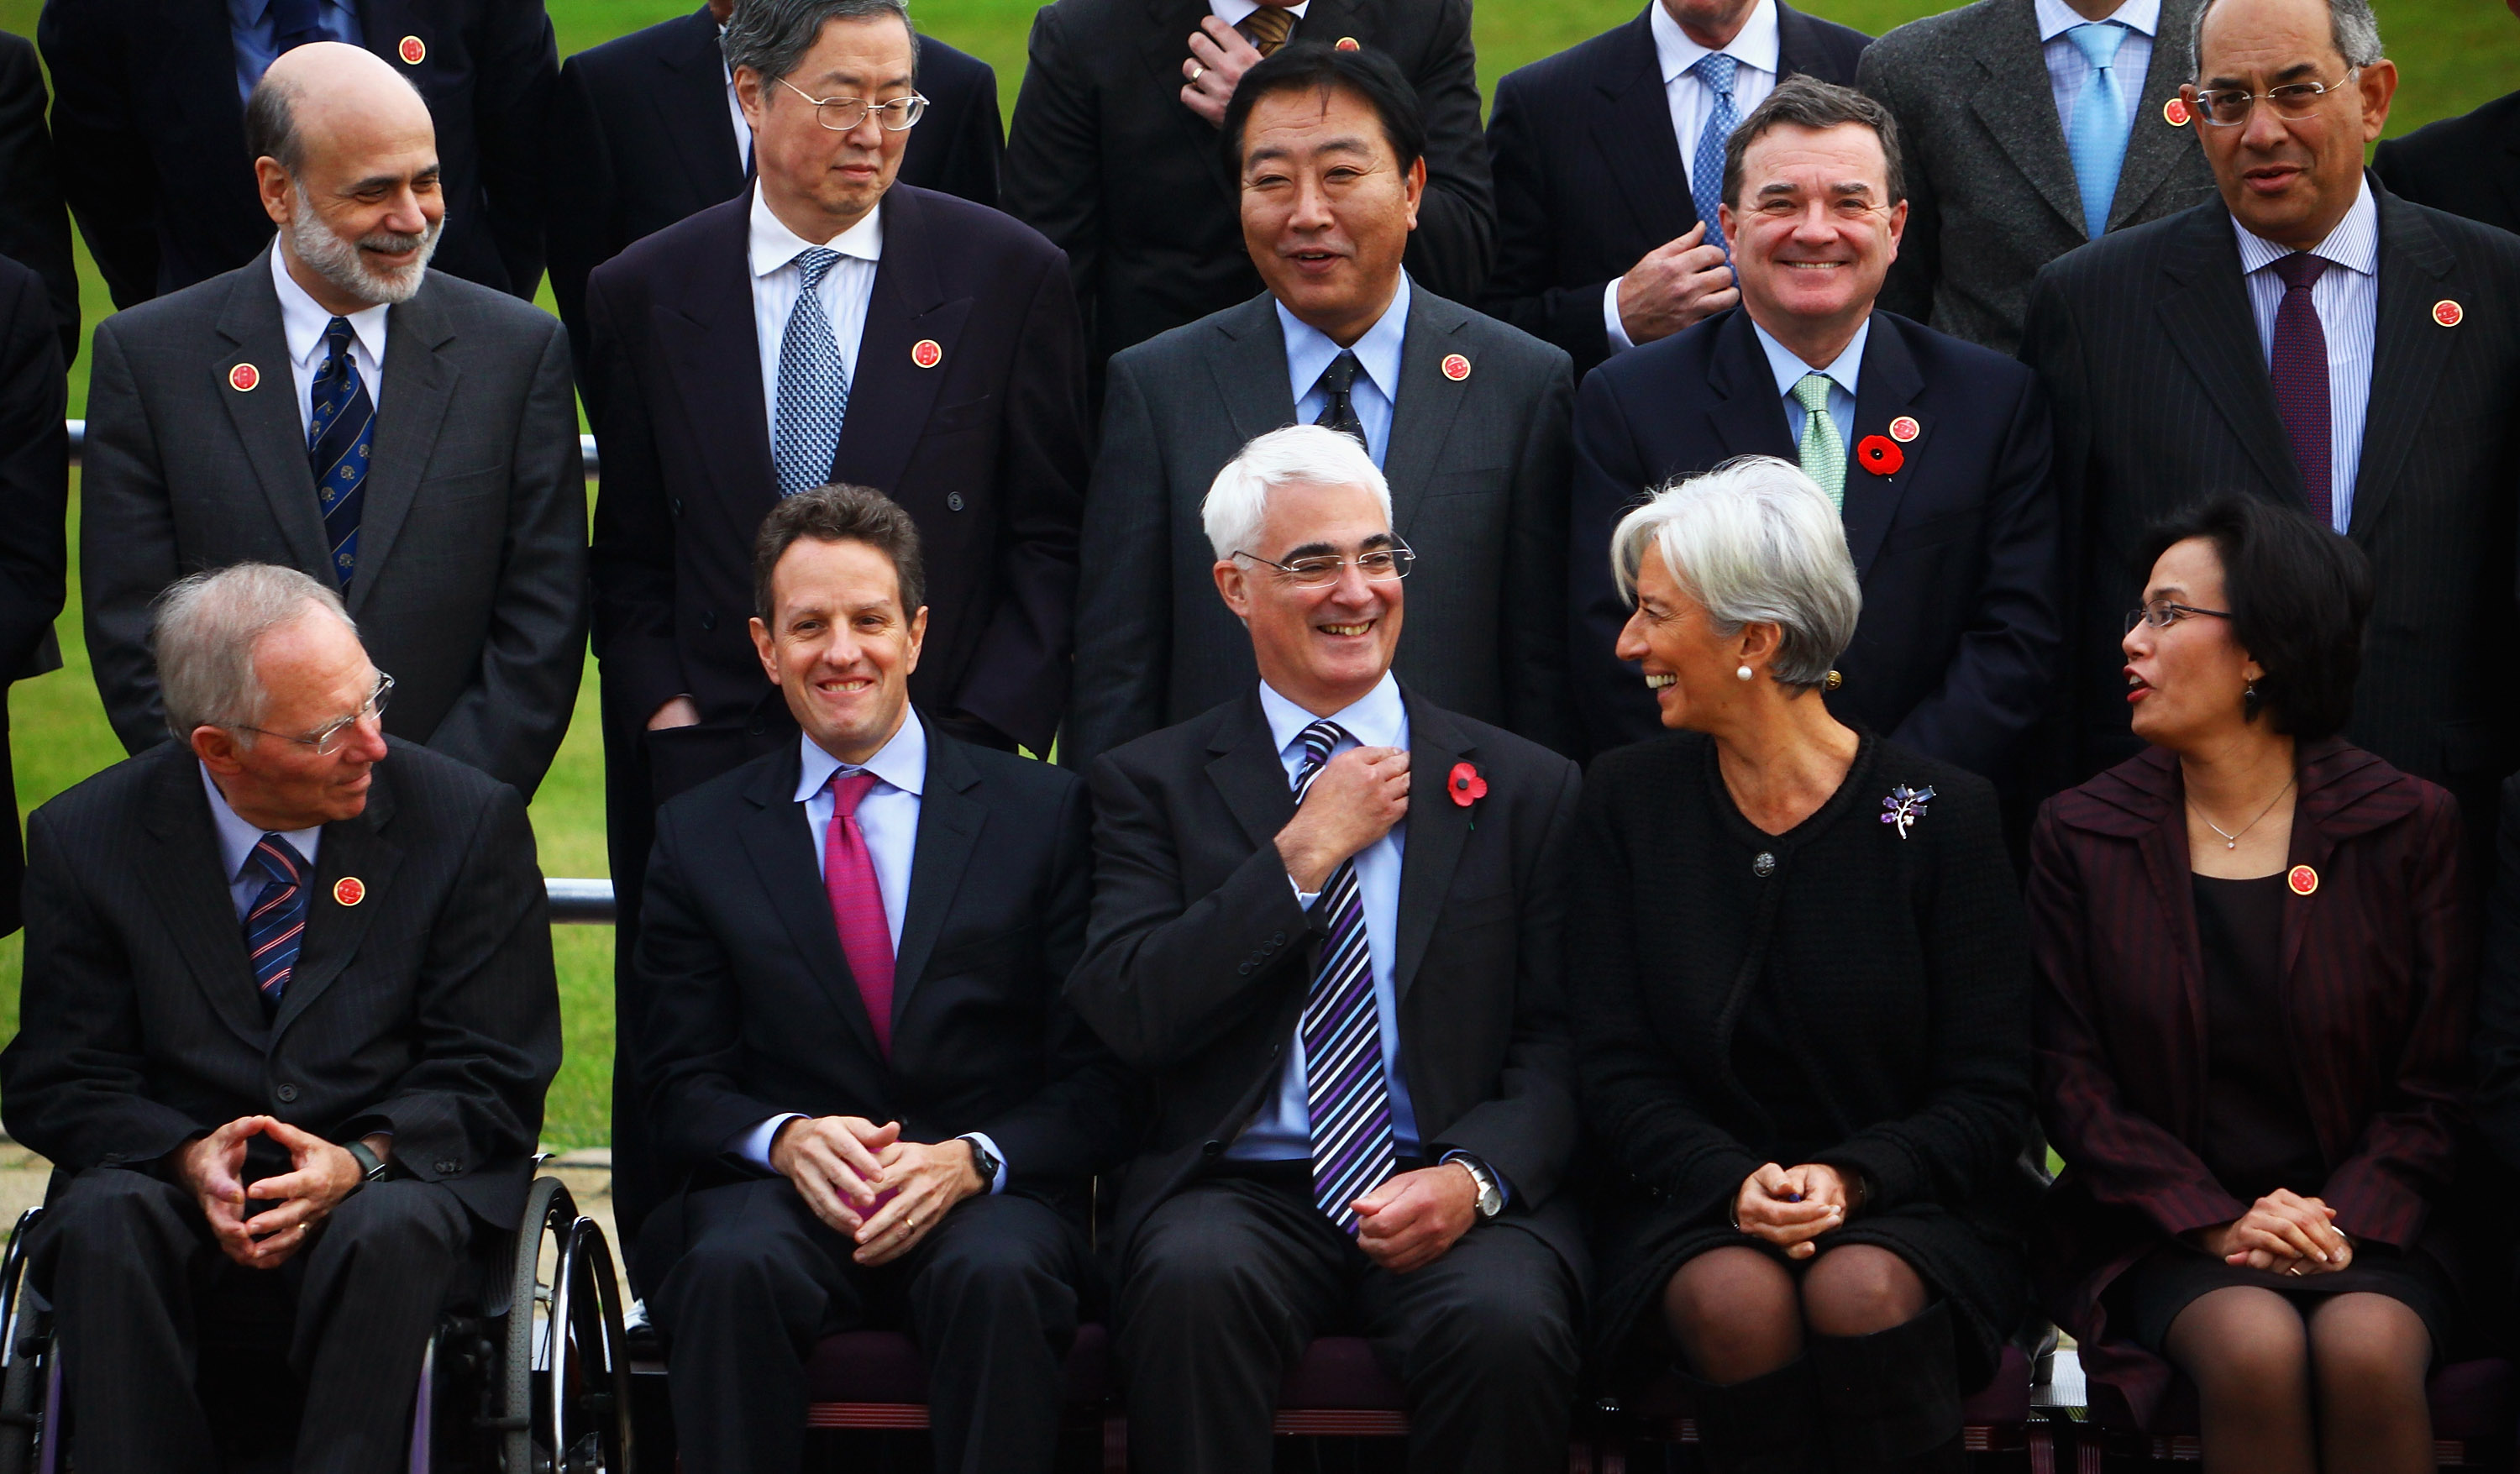 Alistair Darling with then-US Secretary of the Treasury Timothy Geithner and then-French finance minister Christine Lagarde during the G20 finance ministers family photograph on November 7, 2009 in St Andrews, Scotland.